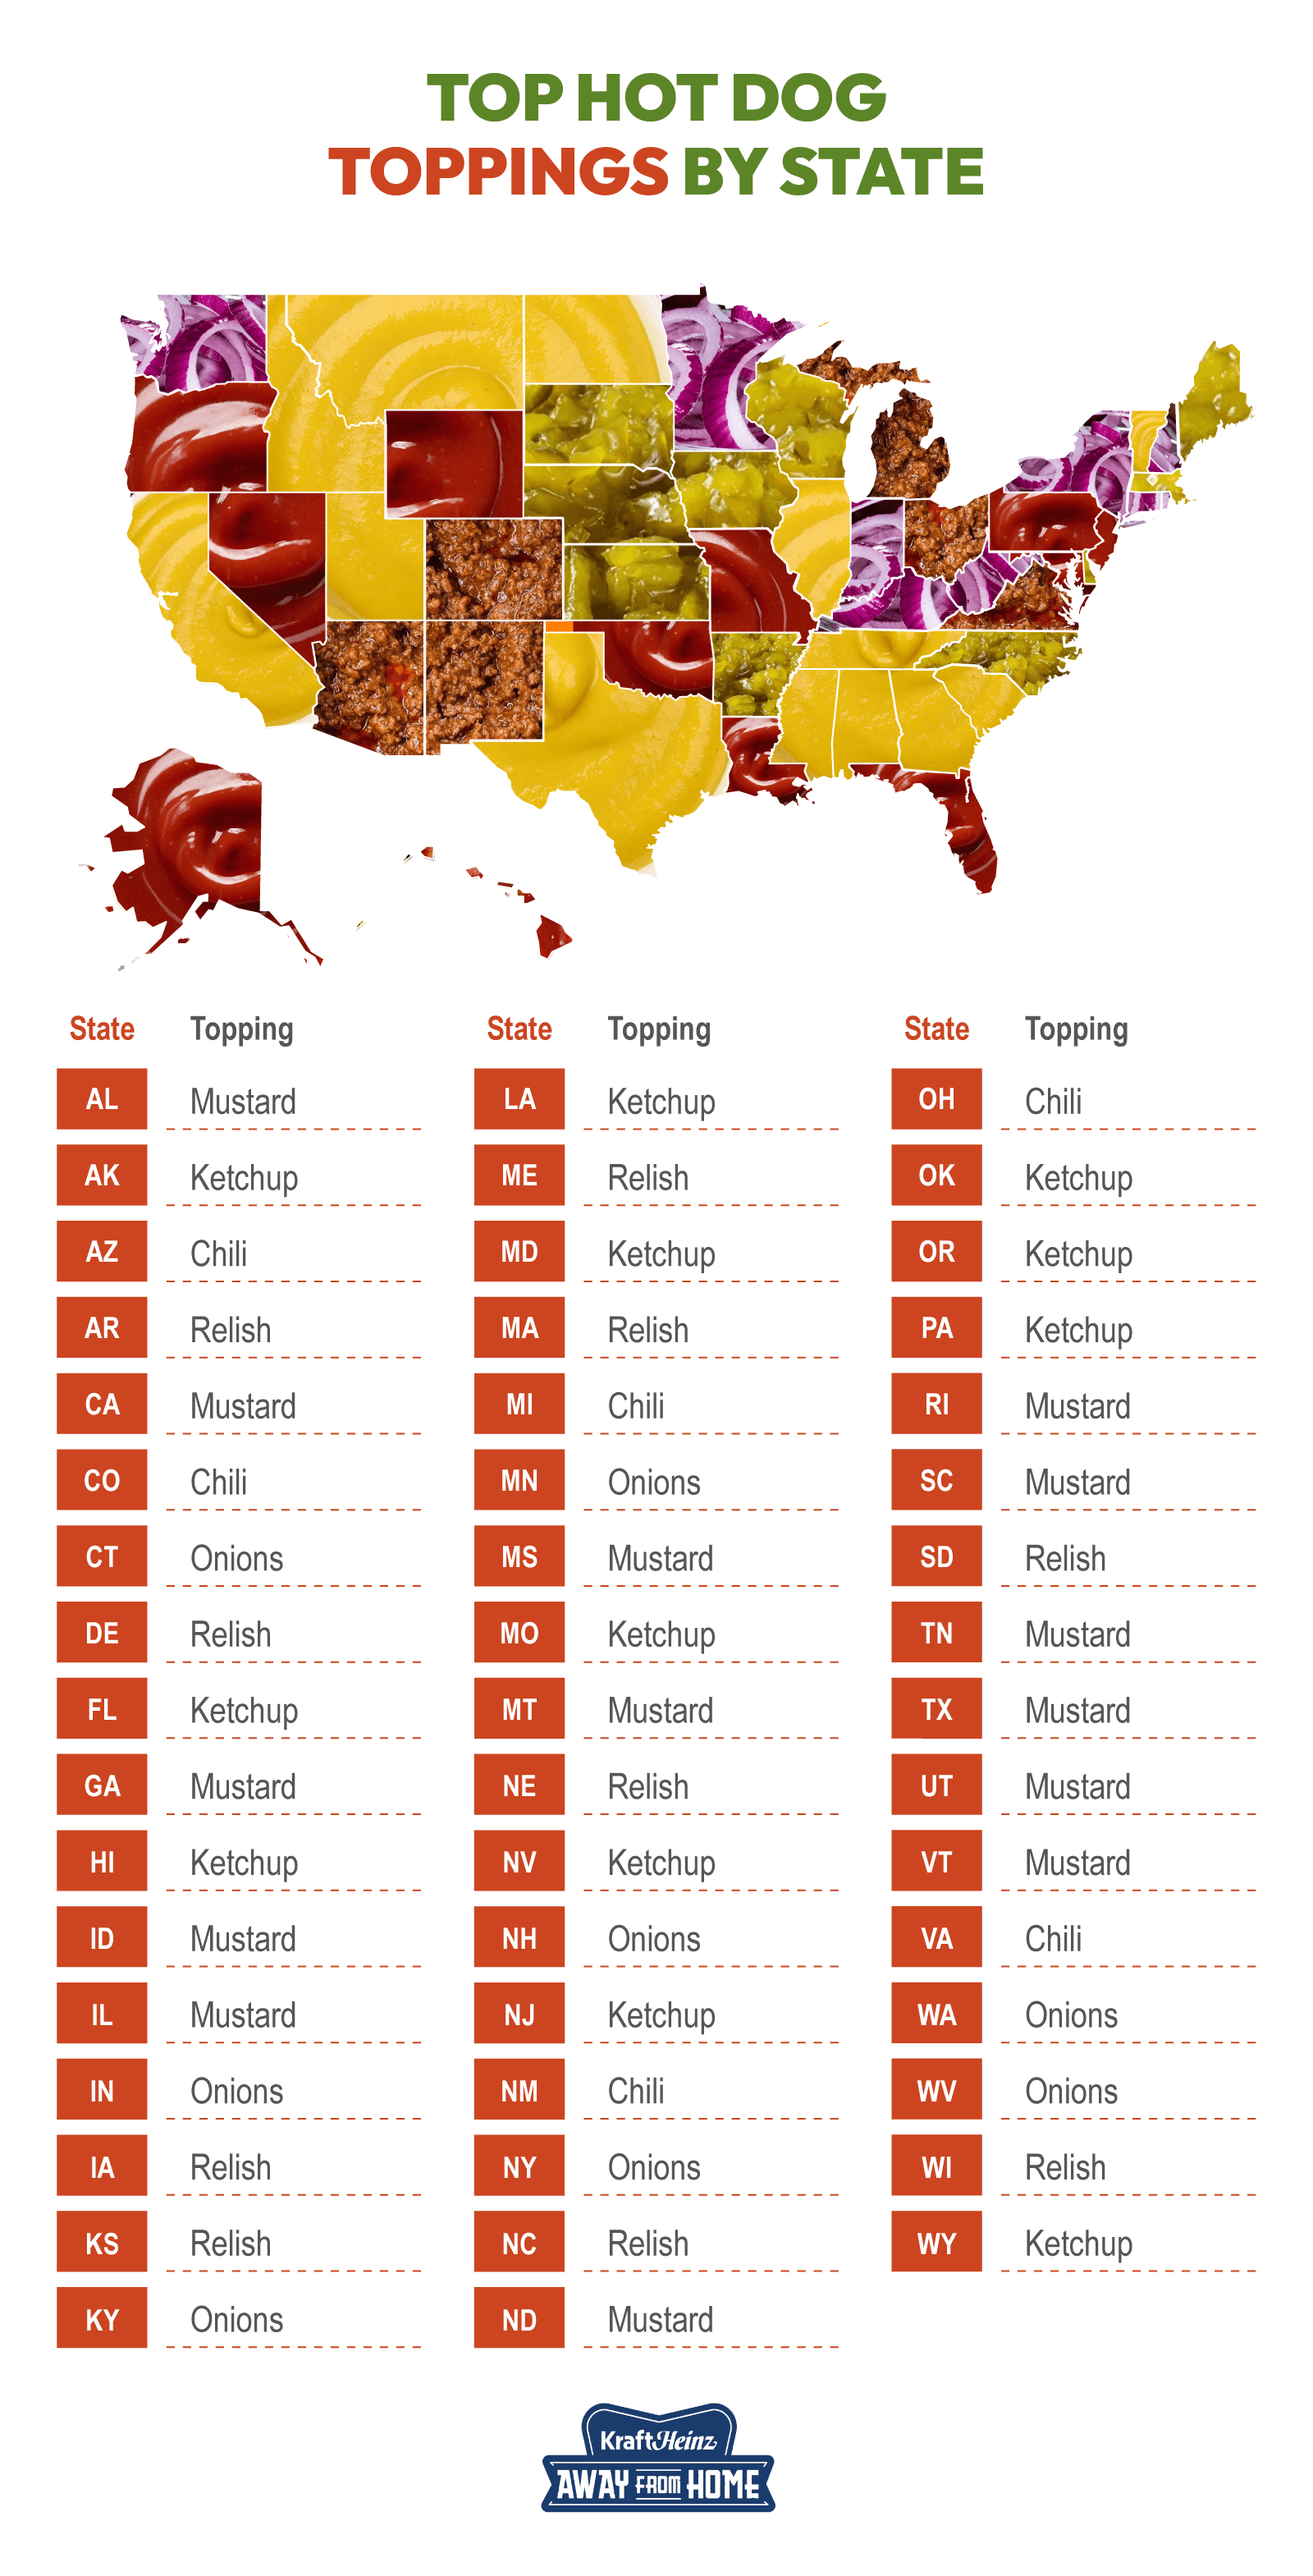 What popular hot dog topping is the most popular in each state - Study from usfoods.com